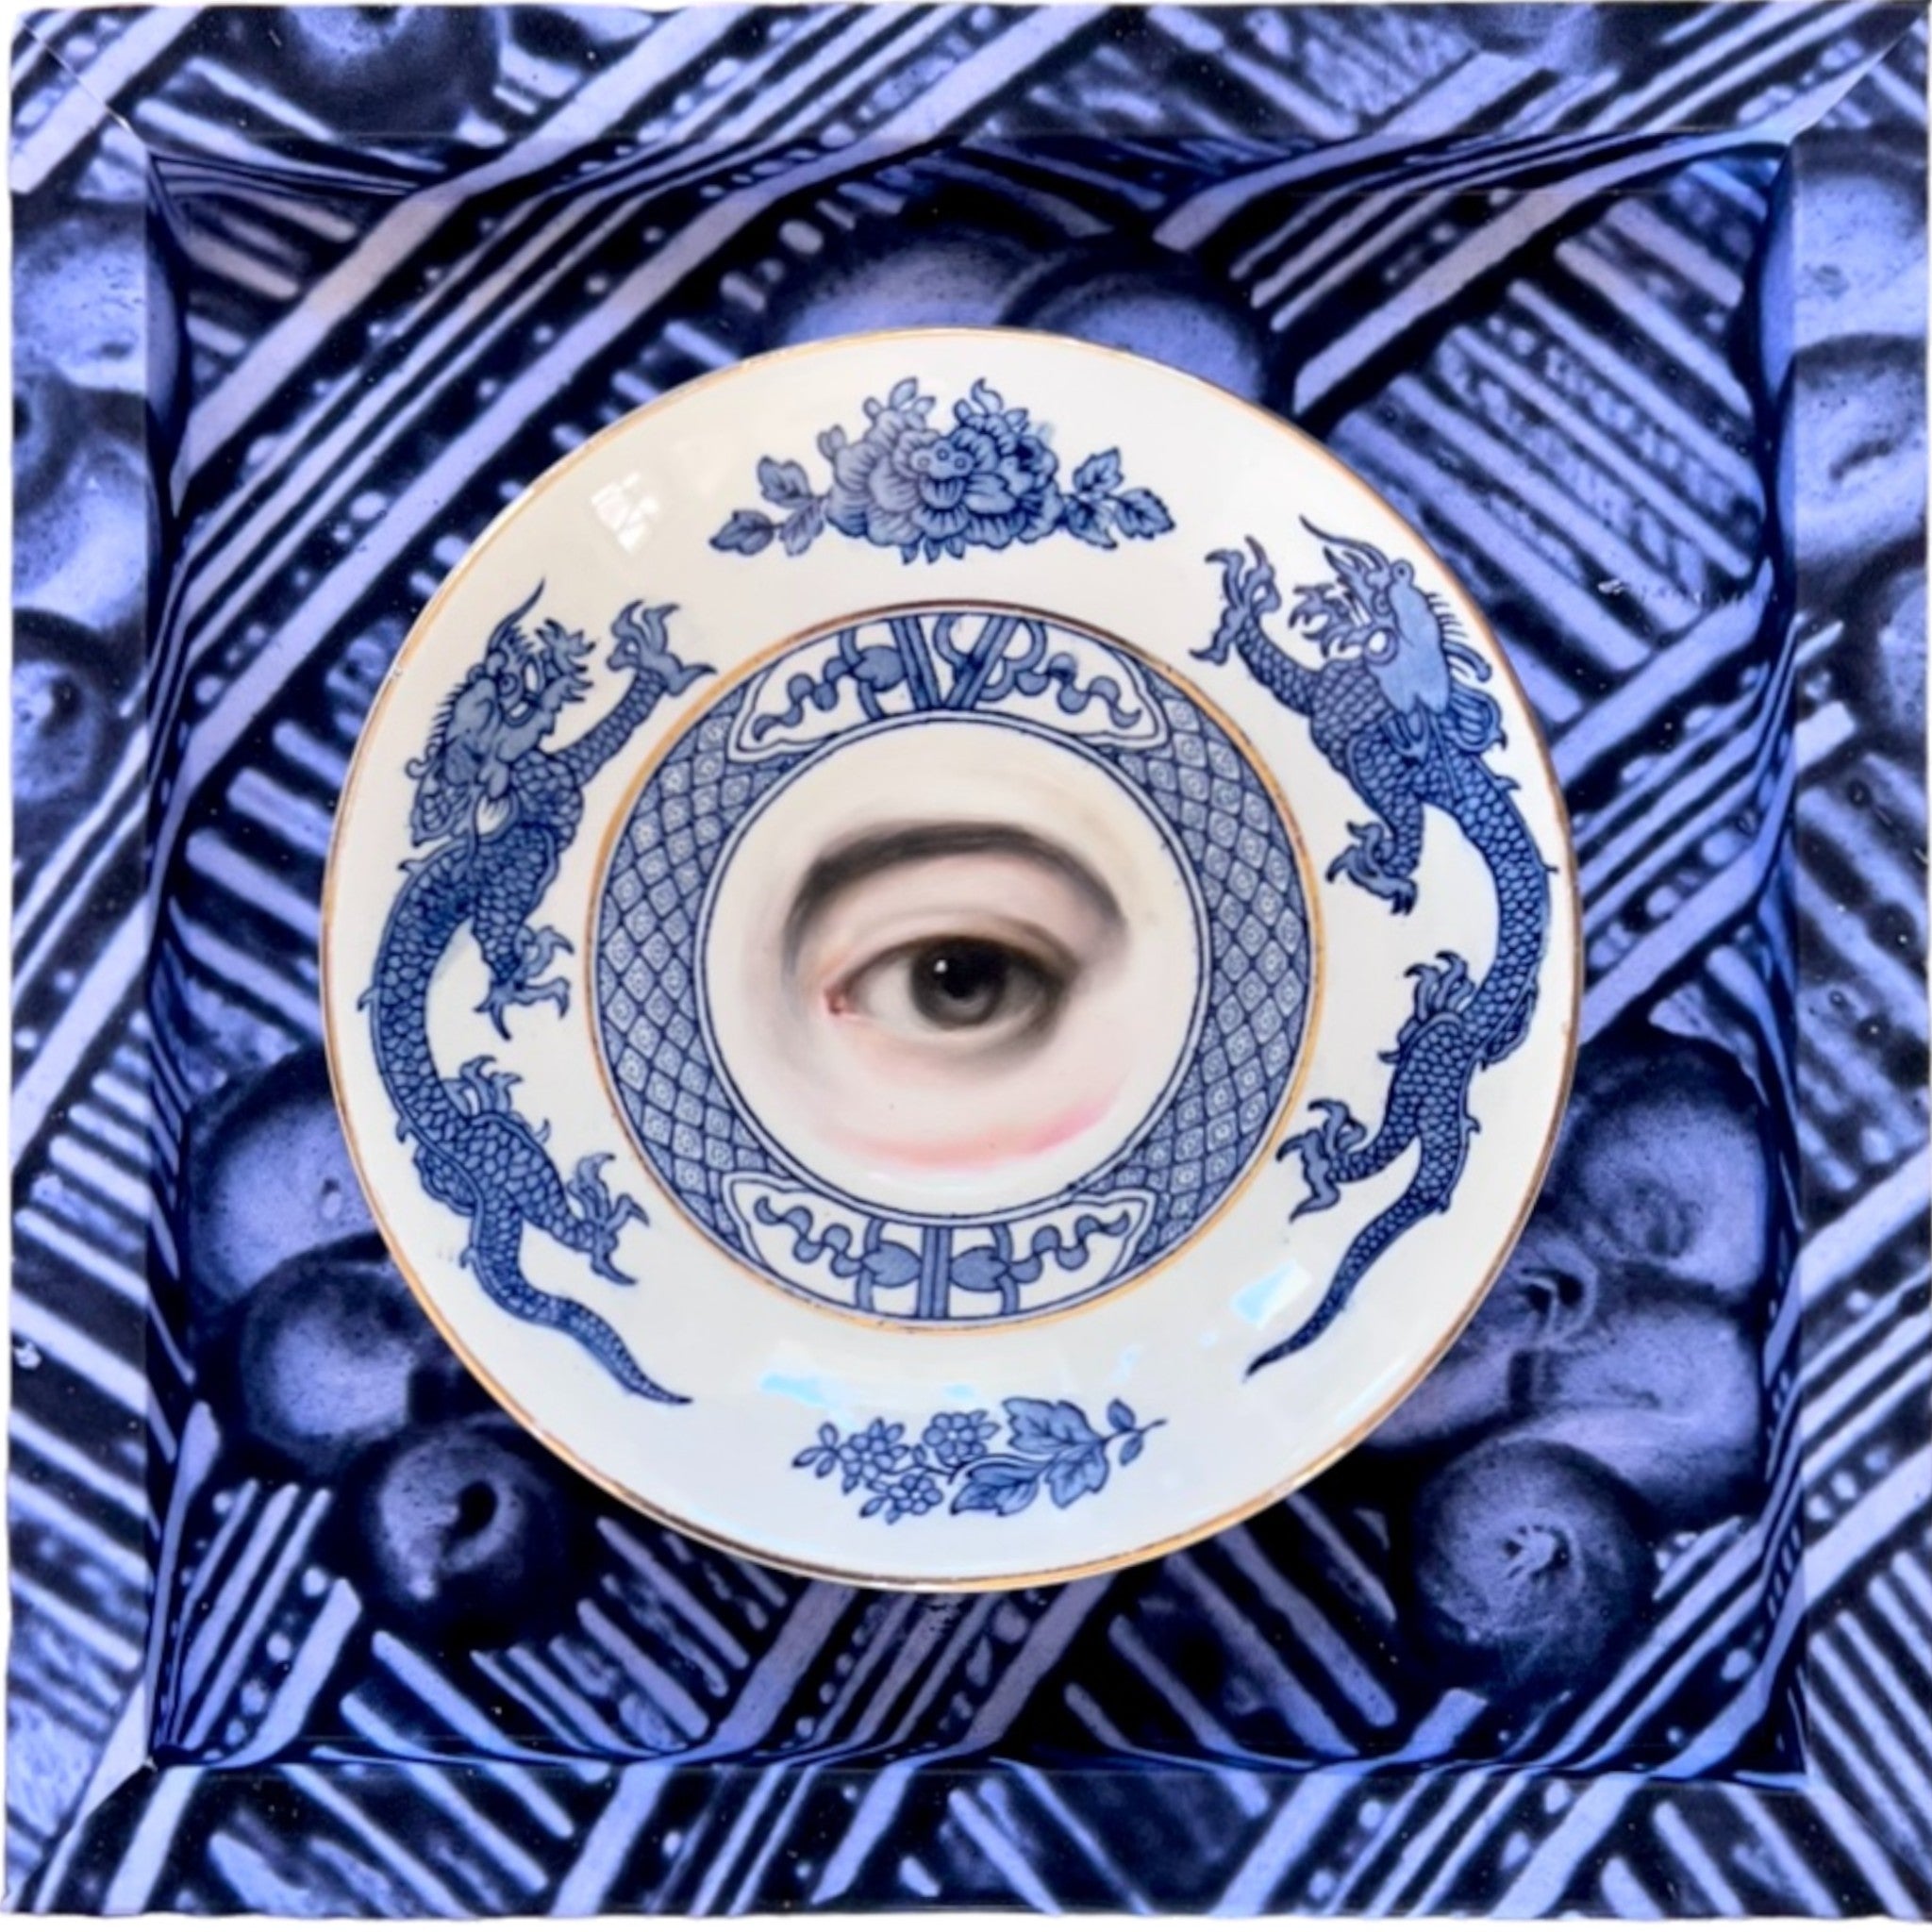 No 1932 Lover's Eye Painting on a Blue Dragon Plate